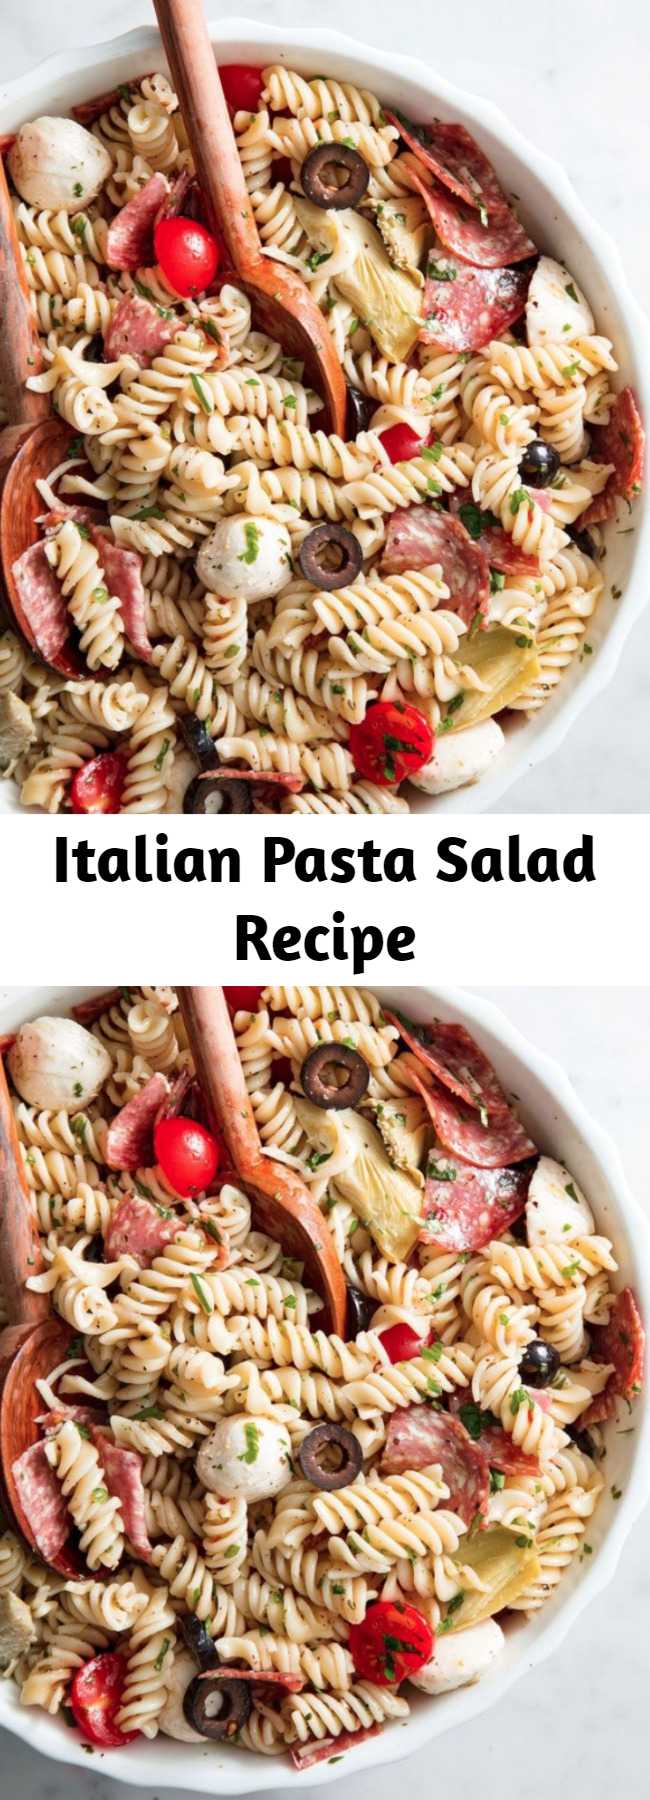 Italian Pasta Salad Recipe - This Italian Pasta Salad is the perfect dish to bring to your summer potluck.